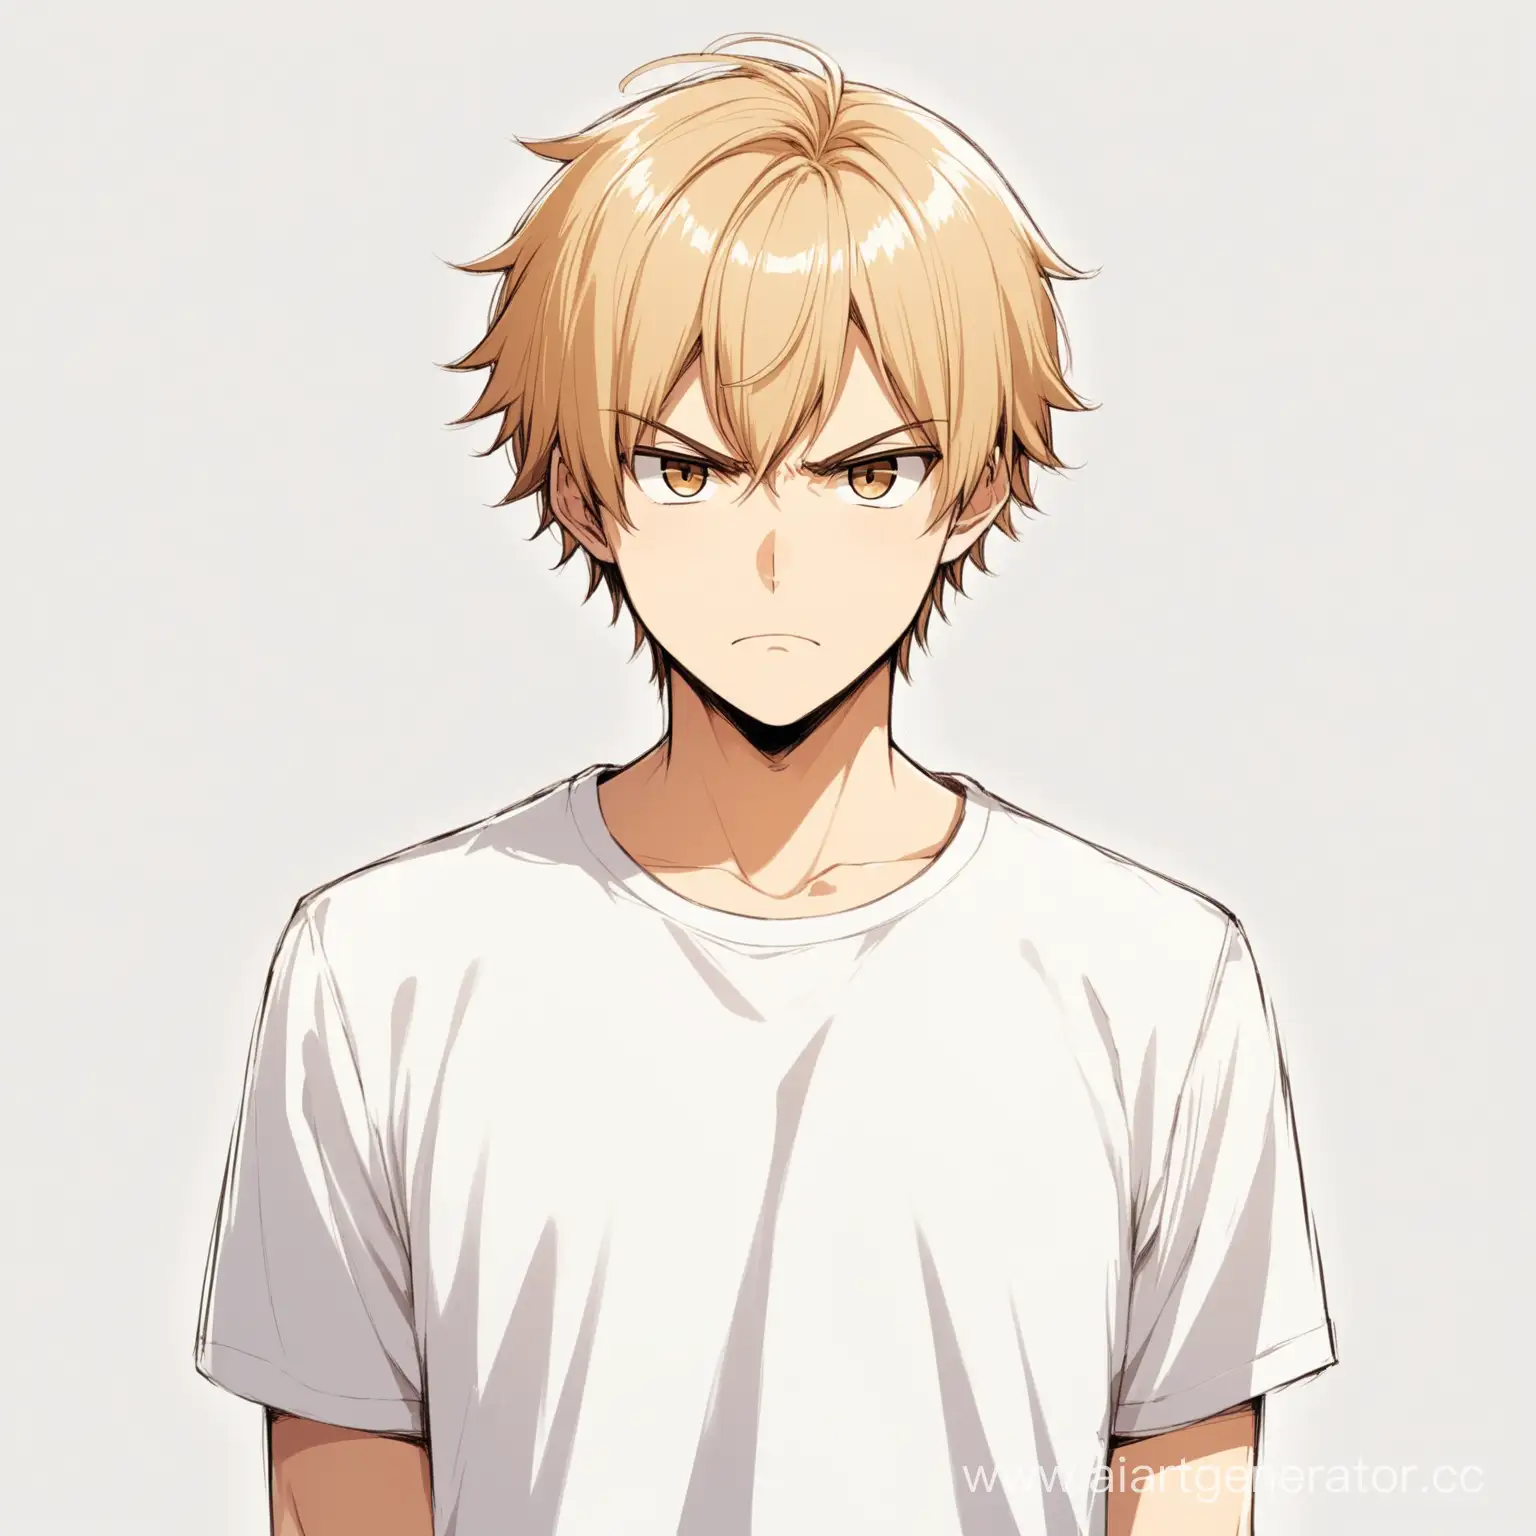 Anime-Guy-in-White-TShirt-with-Disapproving-Expression